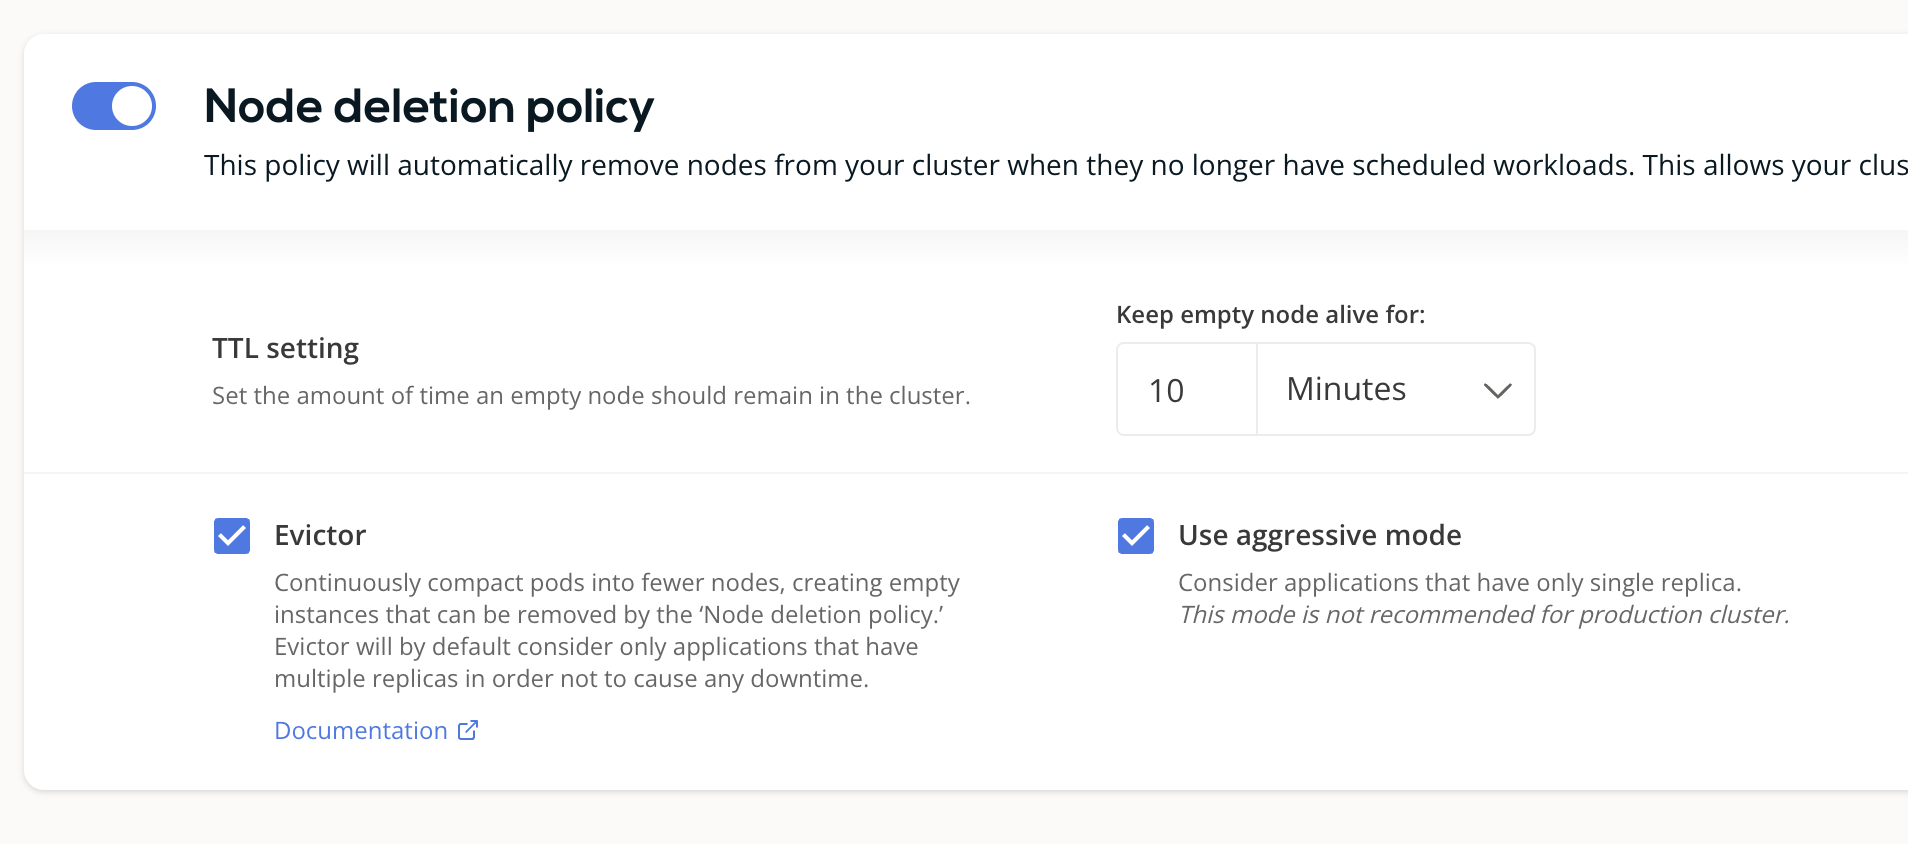 Node deletion policy recommended settings